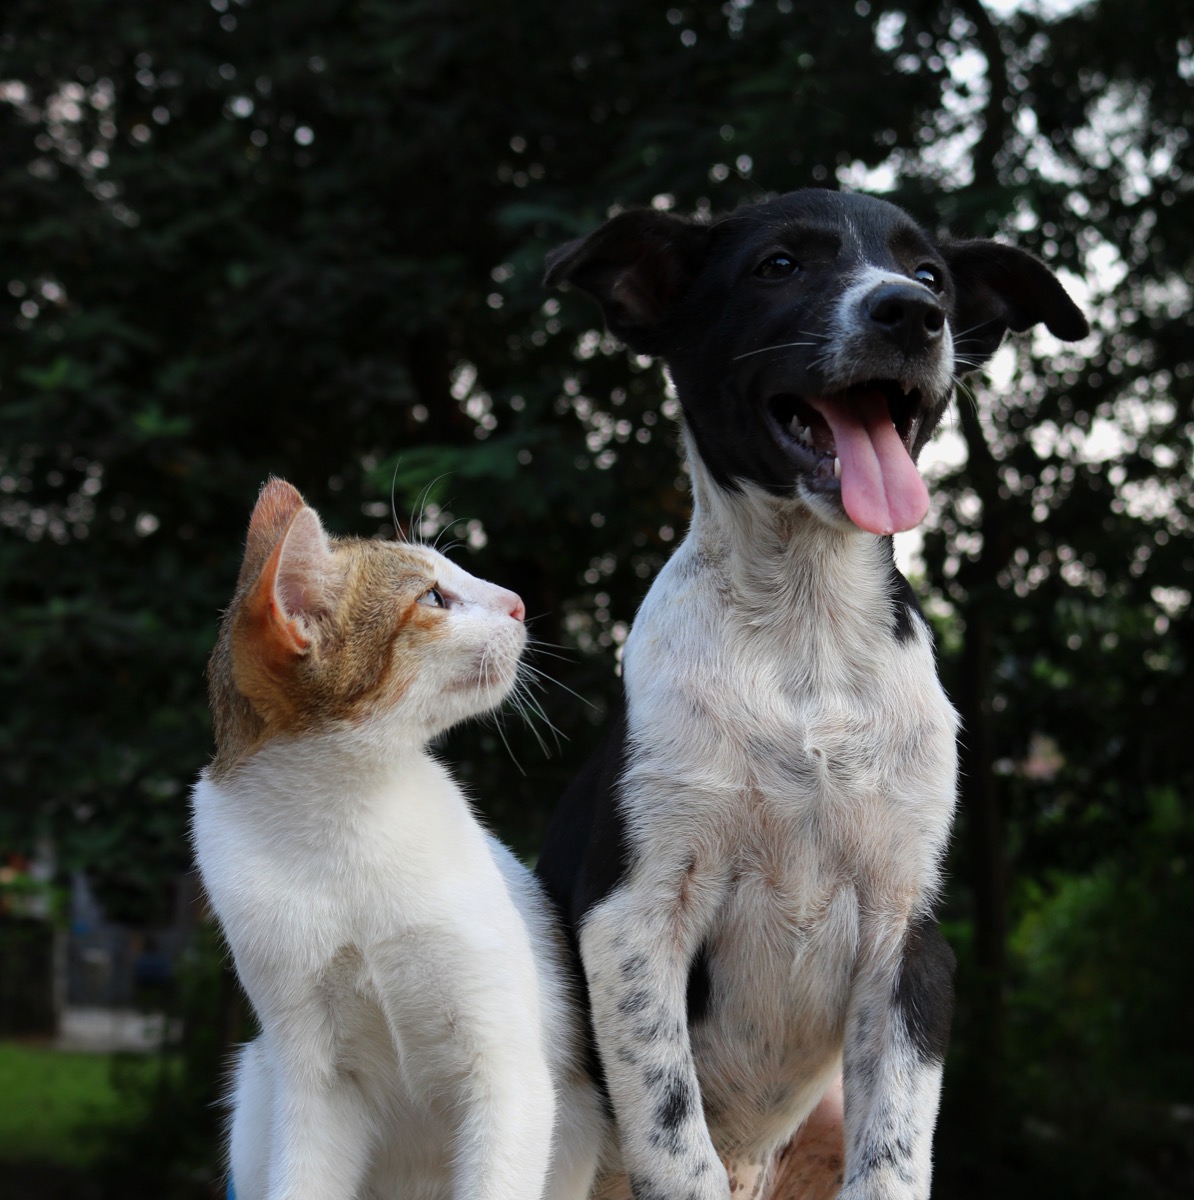 Funny photo of a cat and a dog living together